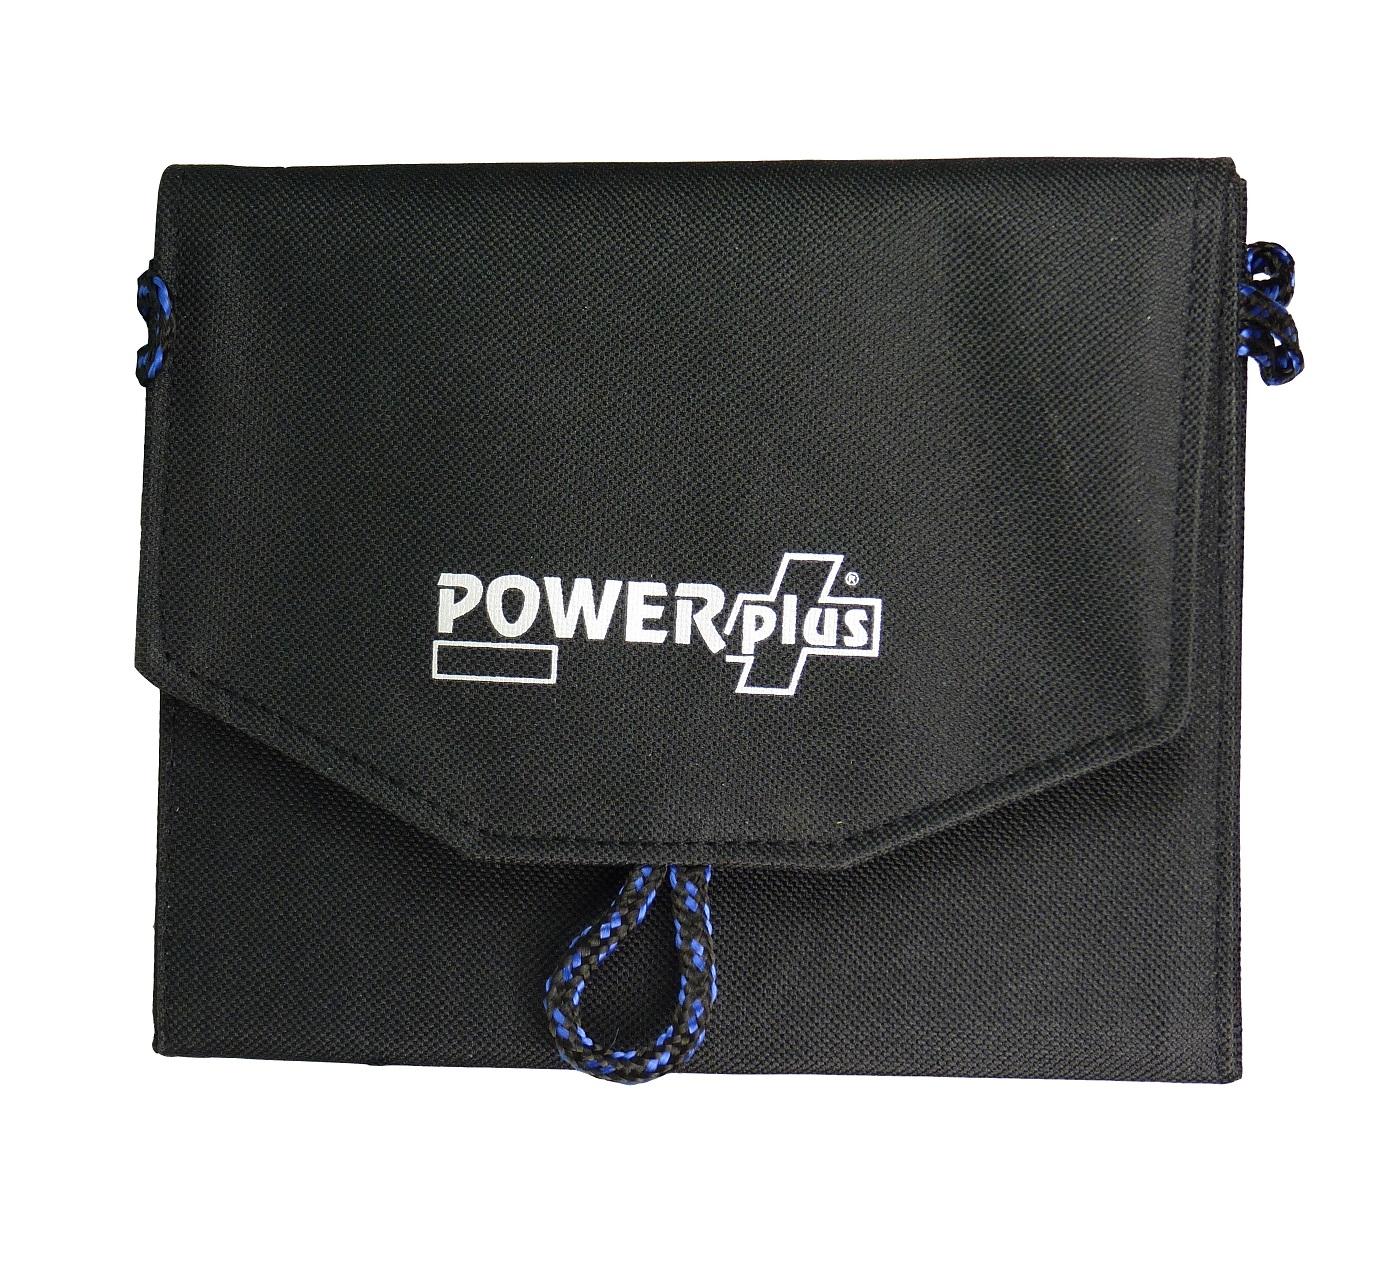 POWERplus Tiger Foldable Compact Solar Charger USB 5V & 12V DC Output